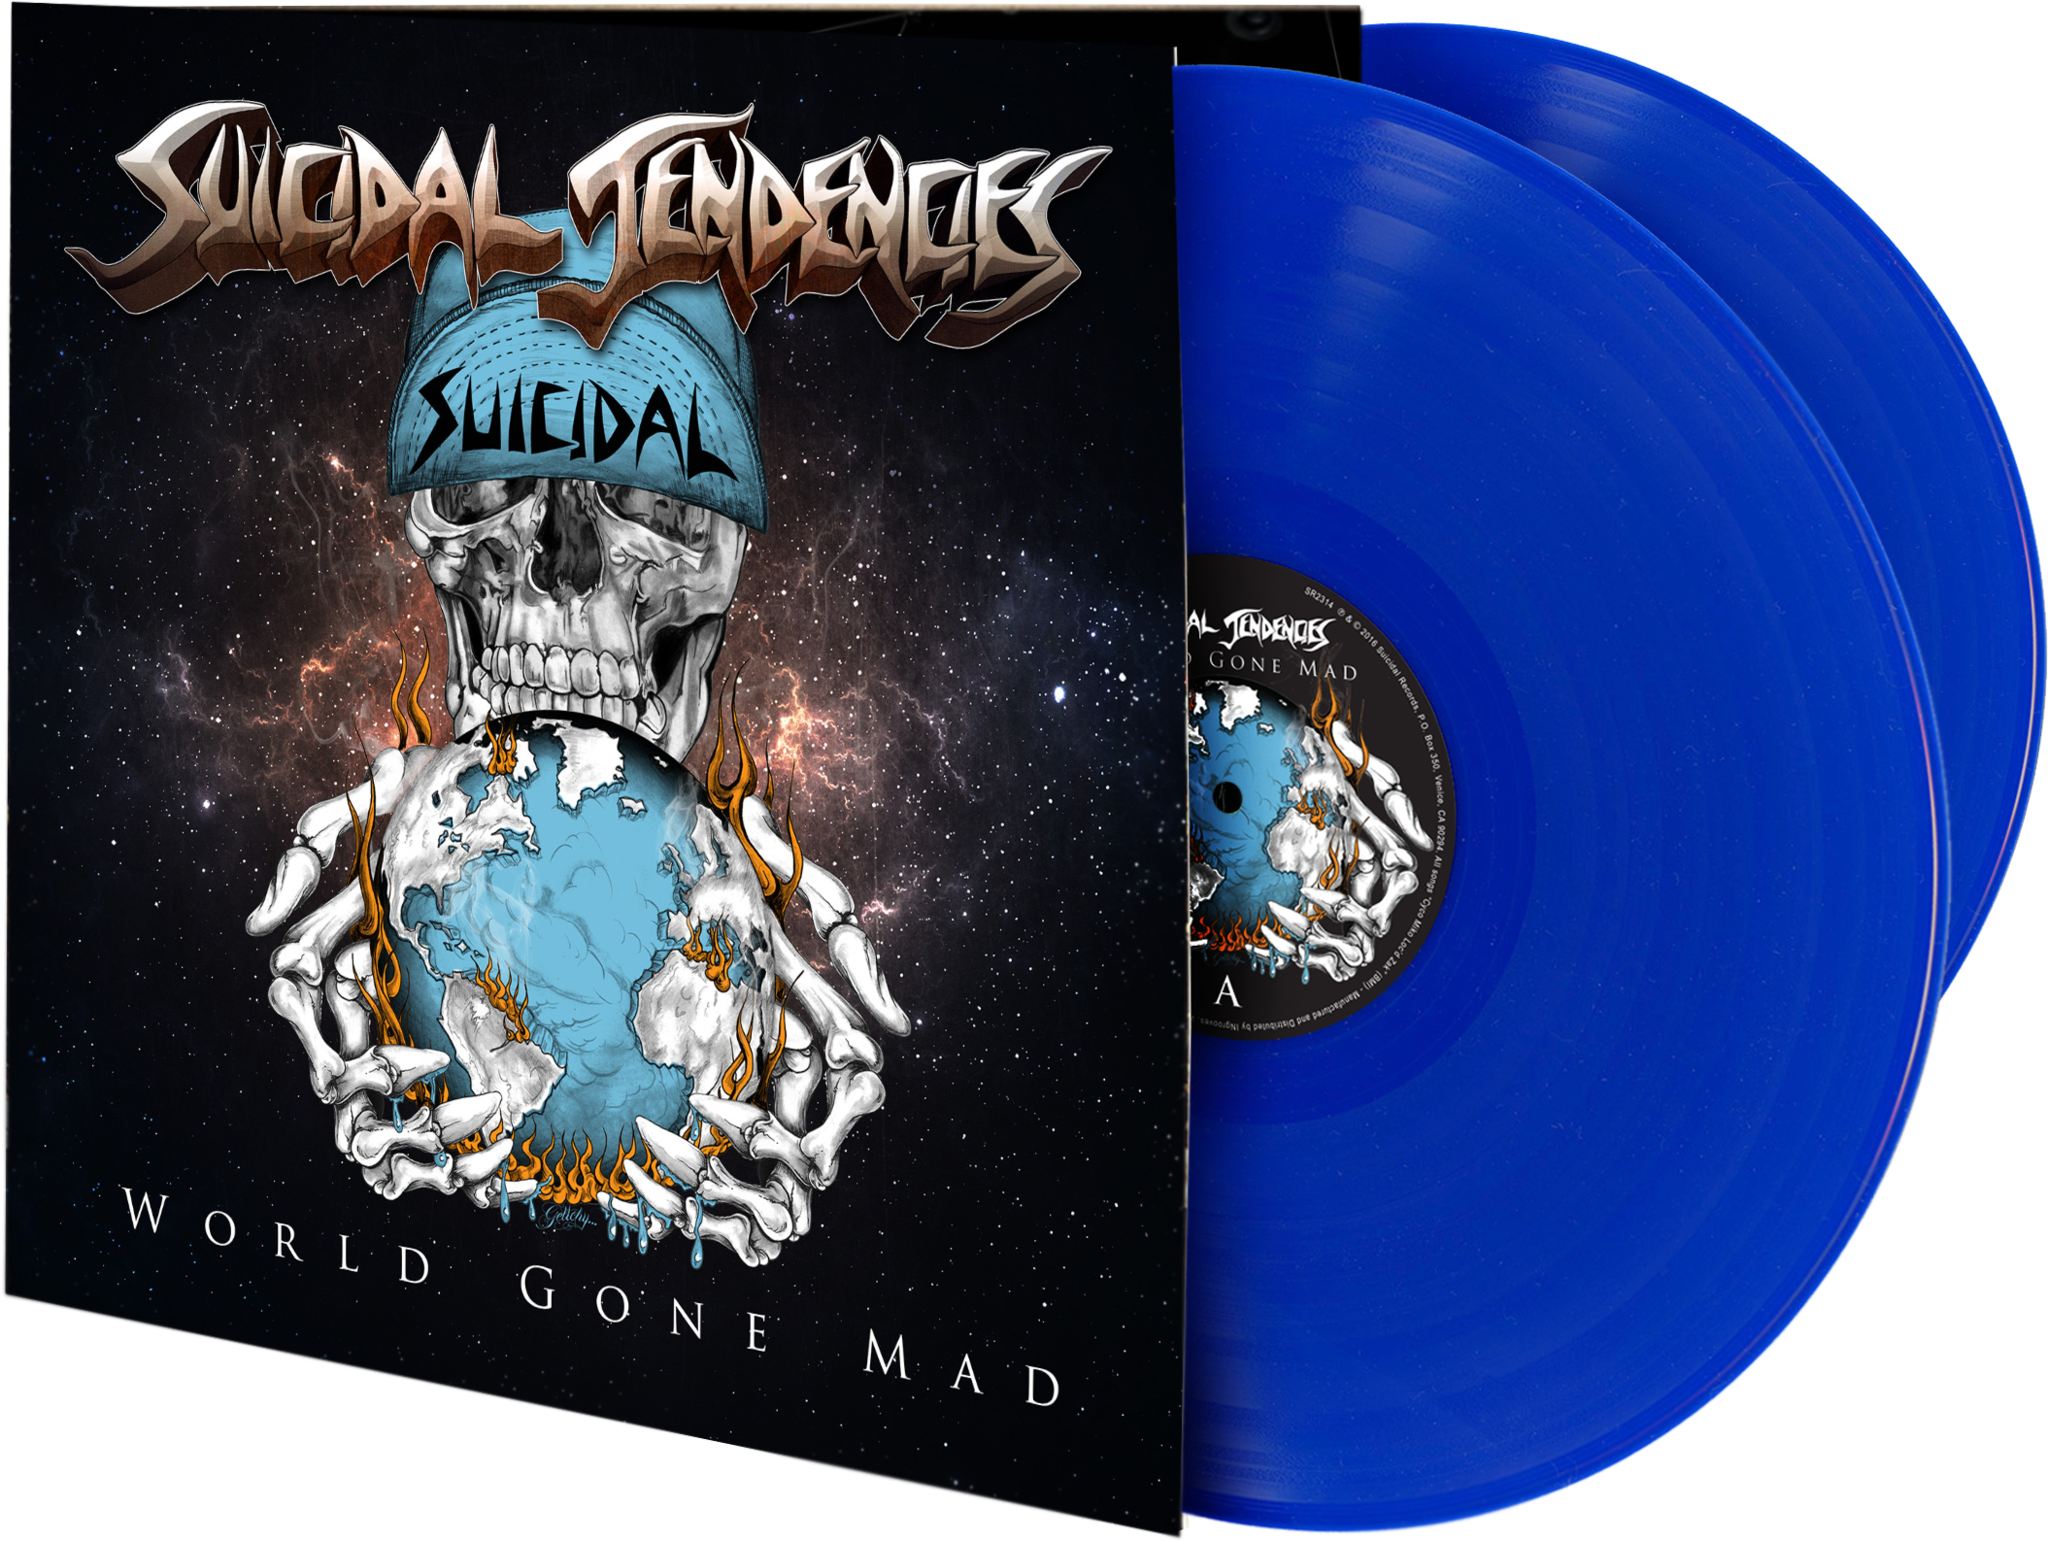 SUICIDAL TENDENCIES "WORLD GONE MAD" BLUE DOUBLE LP